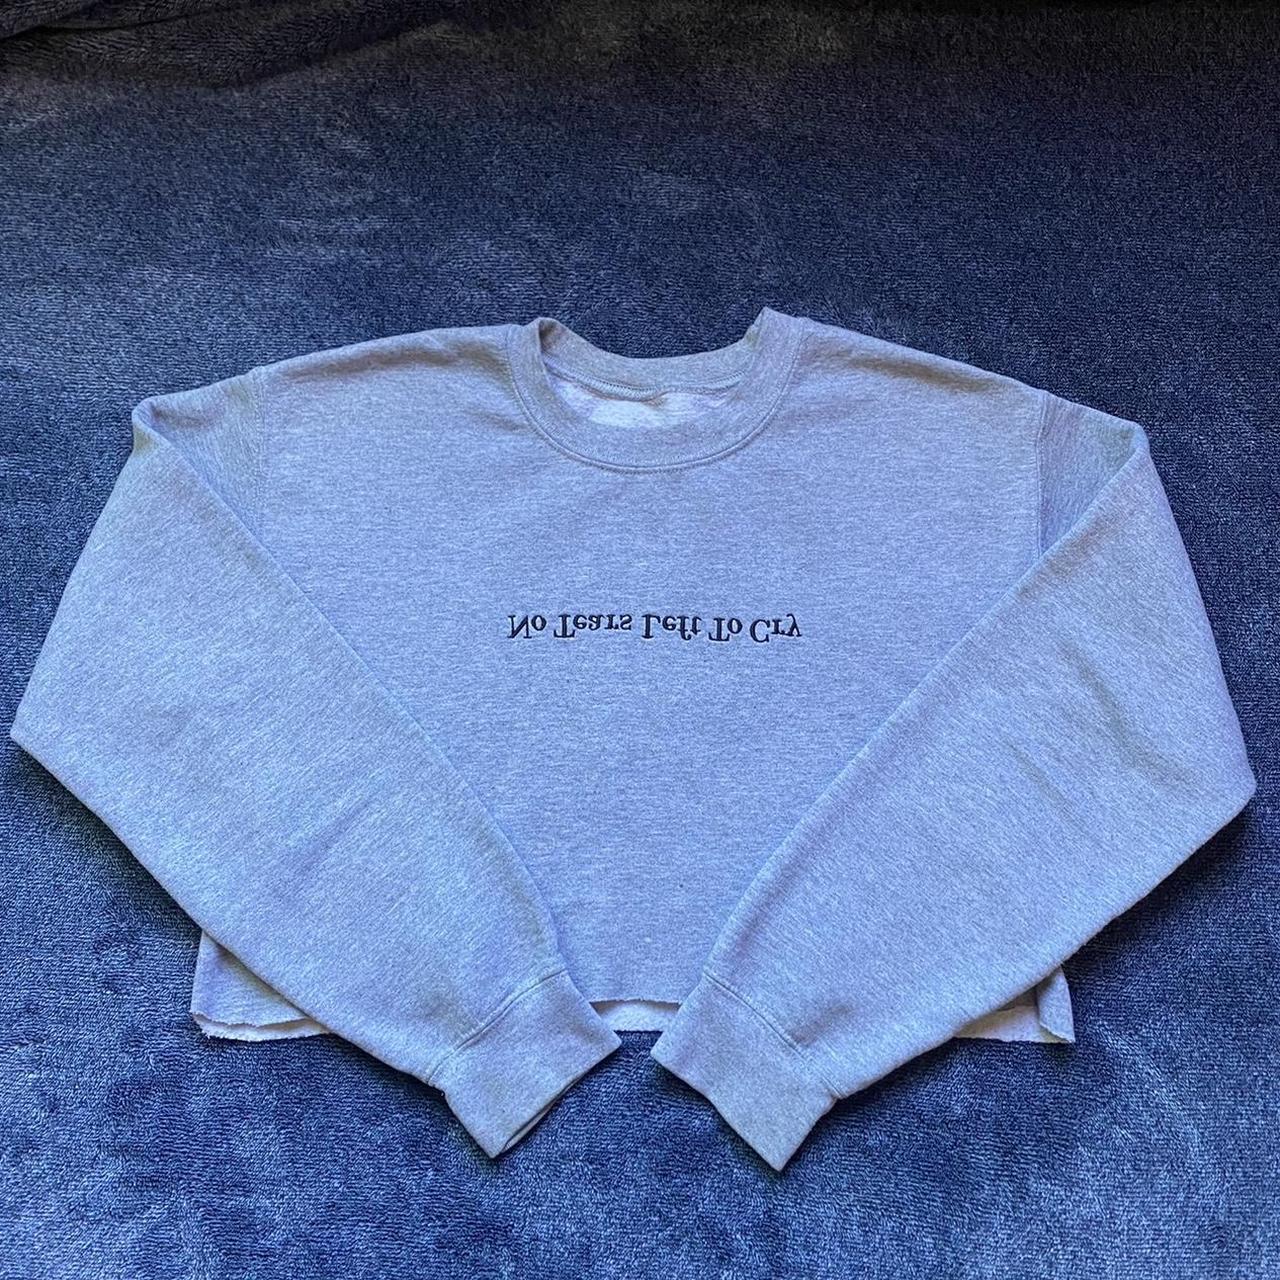 Ariana Grande “No Tears Left To Cry” Cropped... - Depop